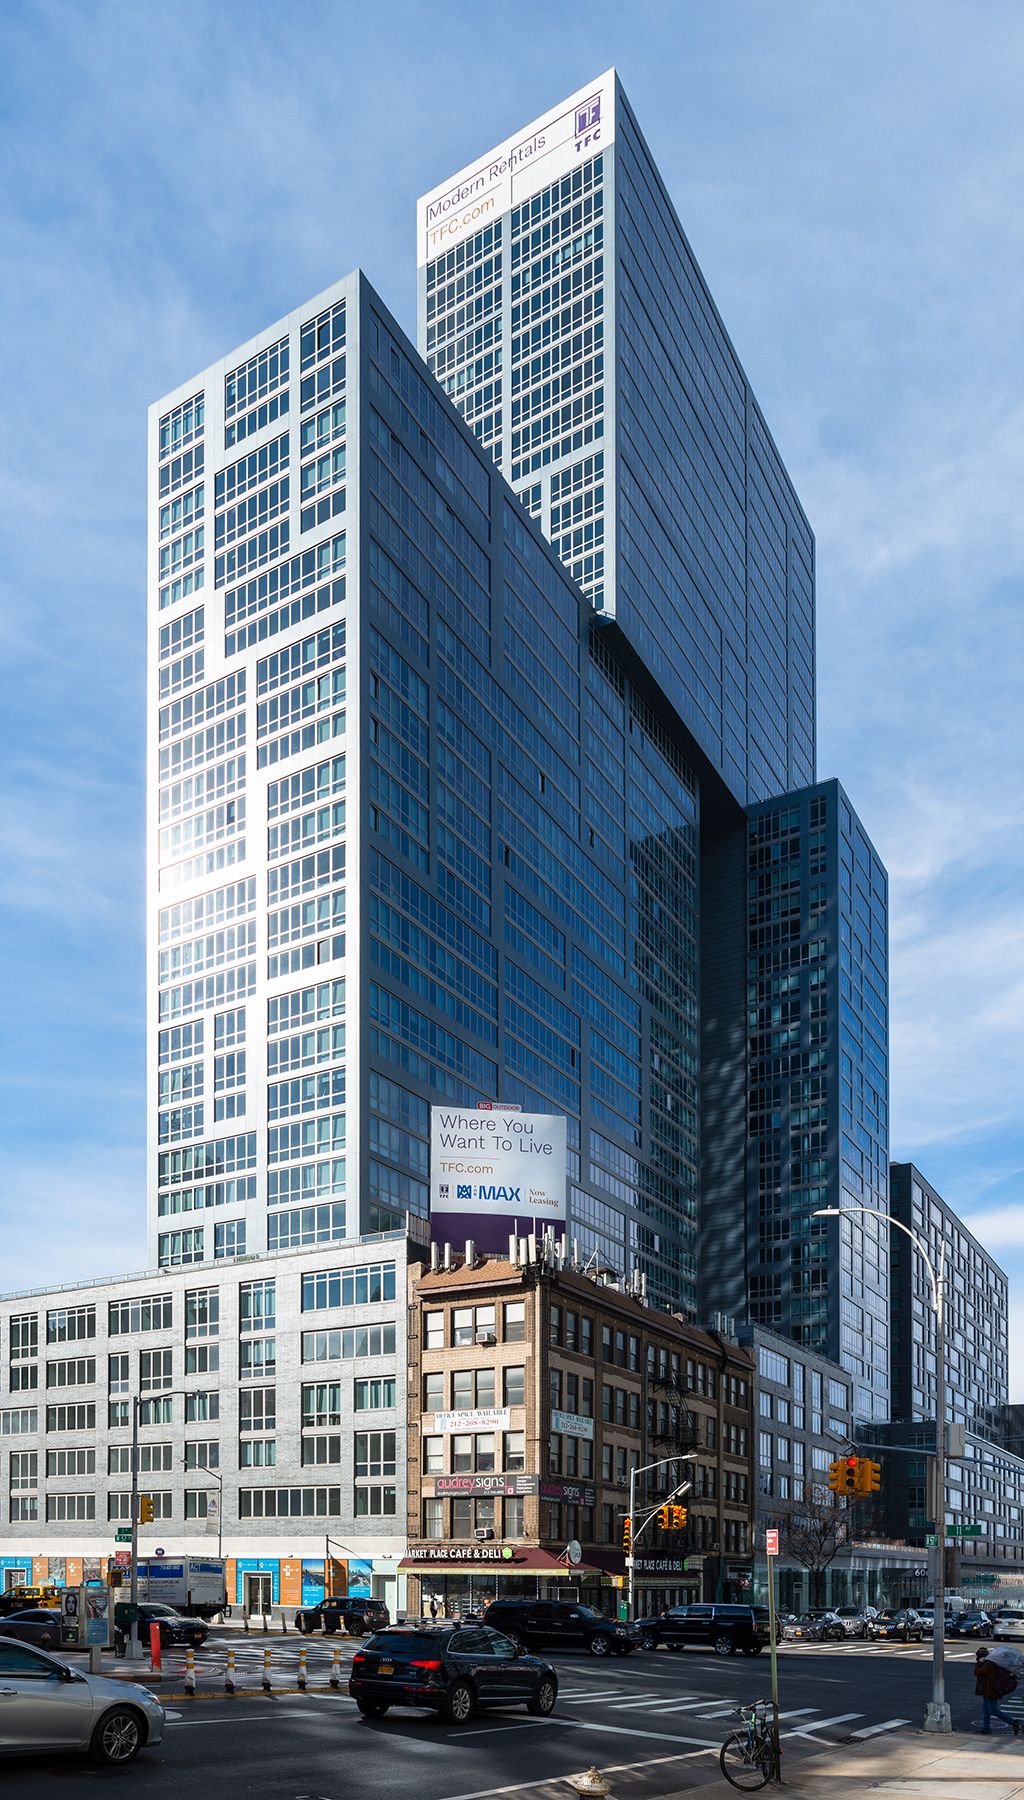 Photograph of 606 W 57th St during the day from a block away, showing the entire building